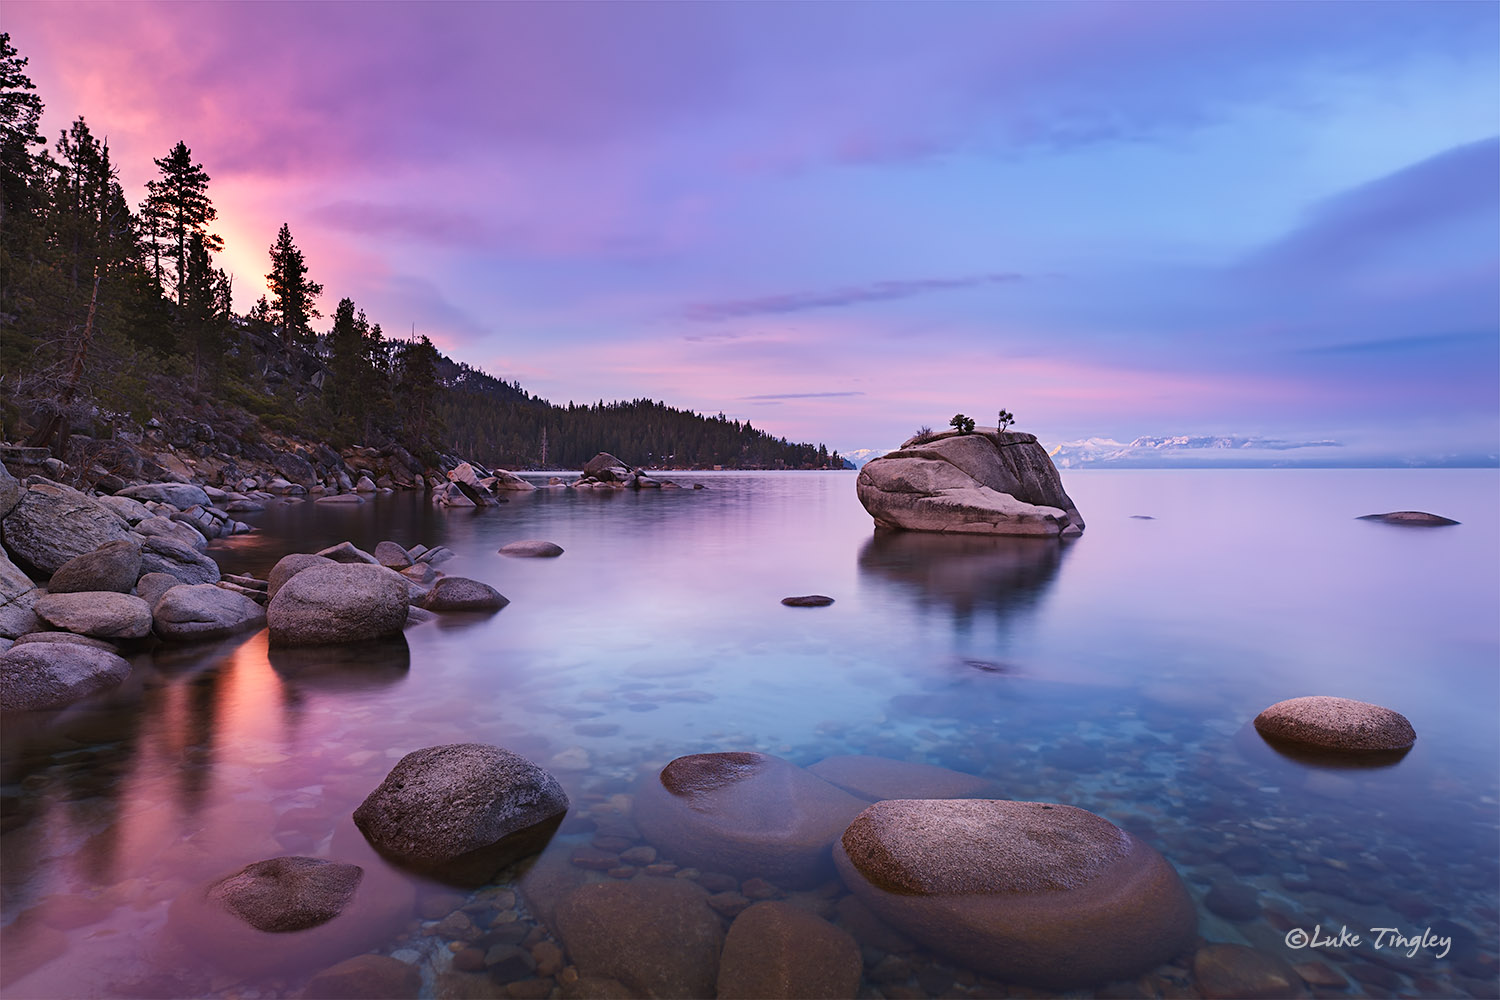 First light on the famous Bonsai Rock on Lake Tahoe.